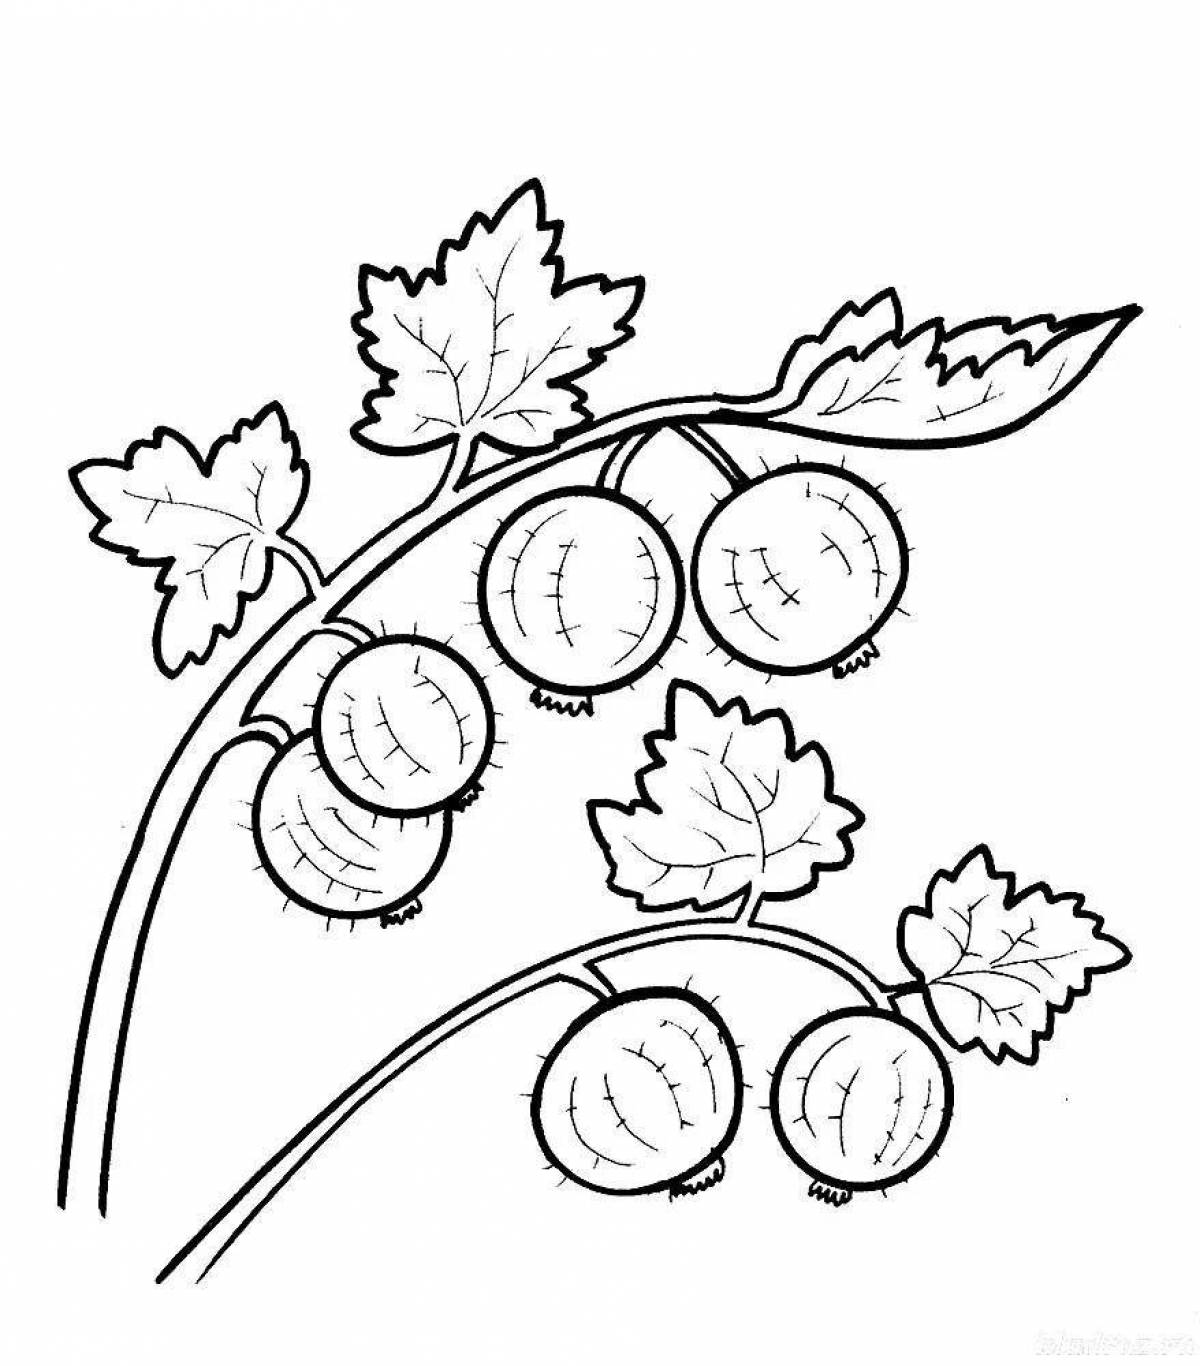 Colorful gooseberry coloring book for kids